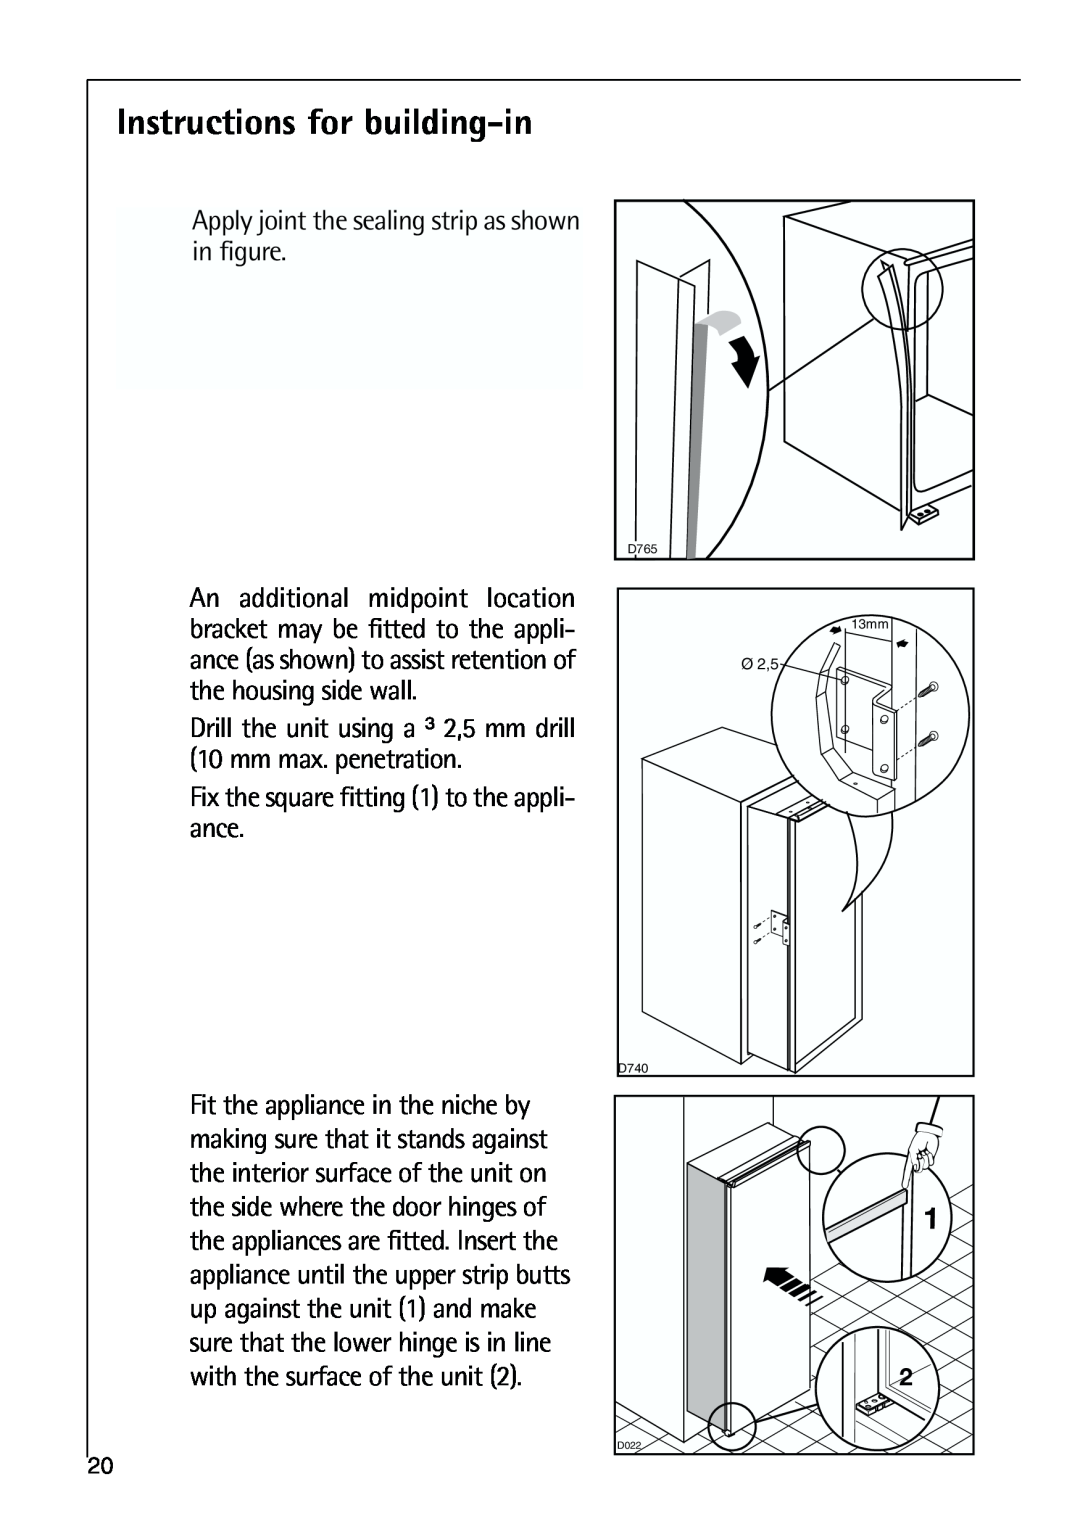 Parkinson Cowan SANTO K 40-5i, SANTO K 9 Instructions for building-in, Apply joint the sealing strip as shown in figure 